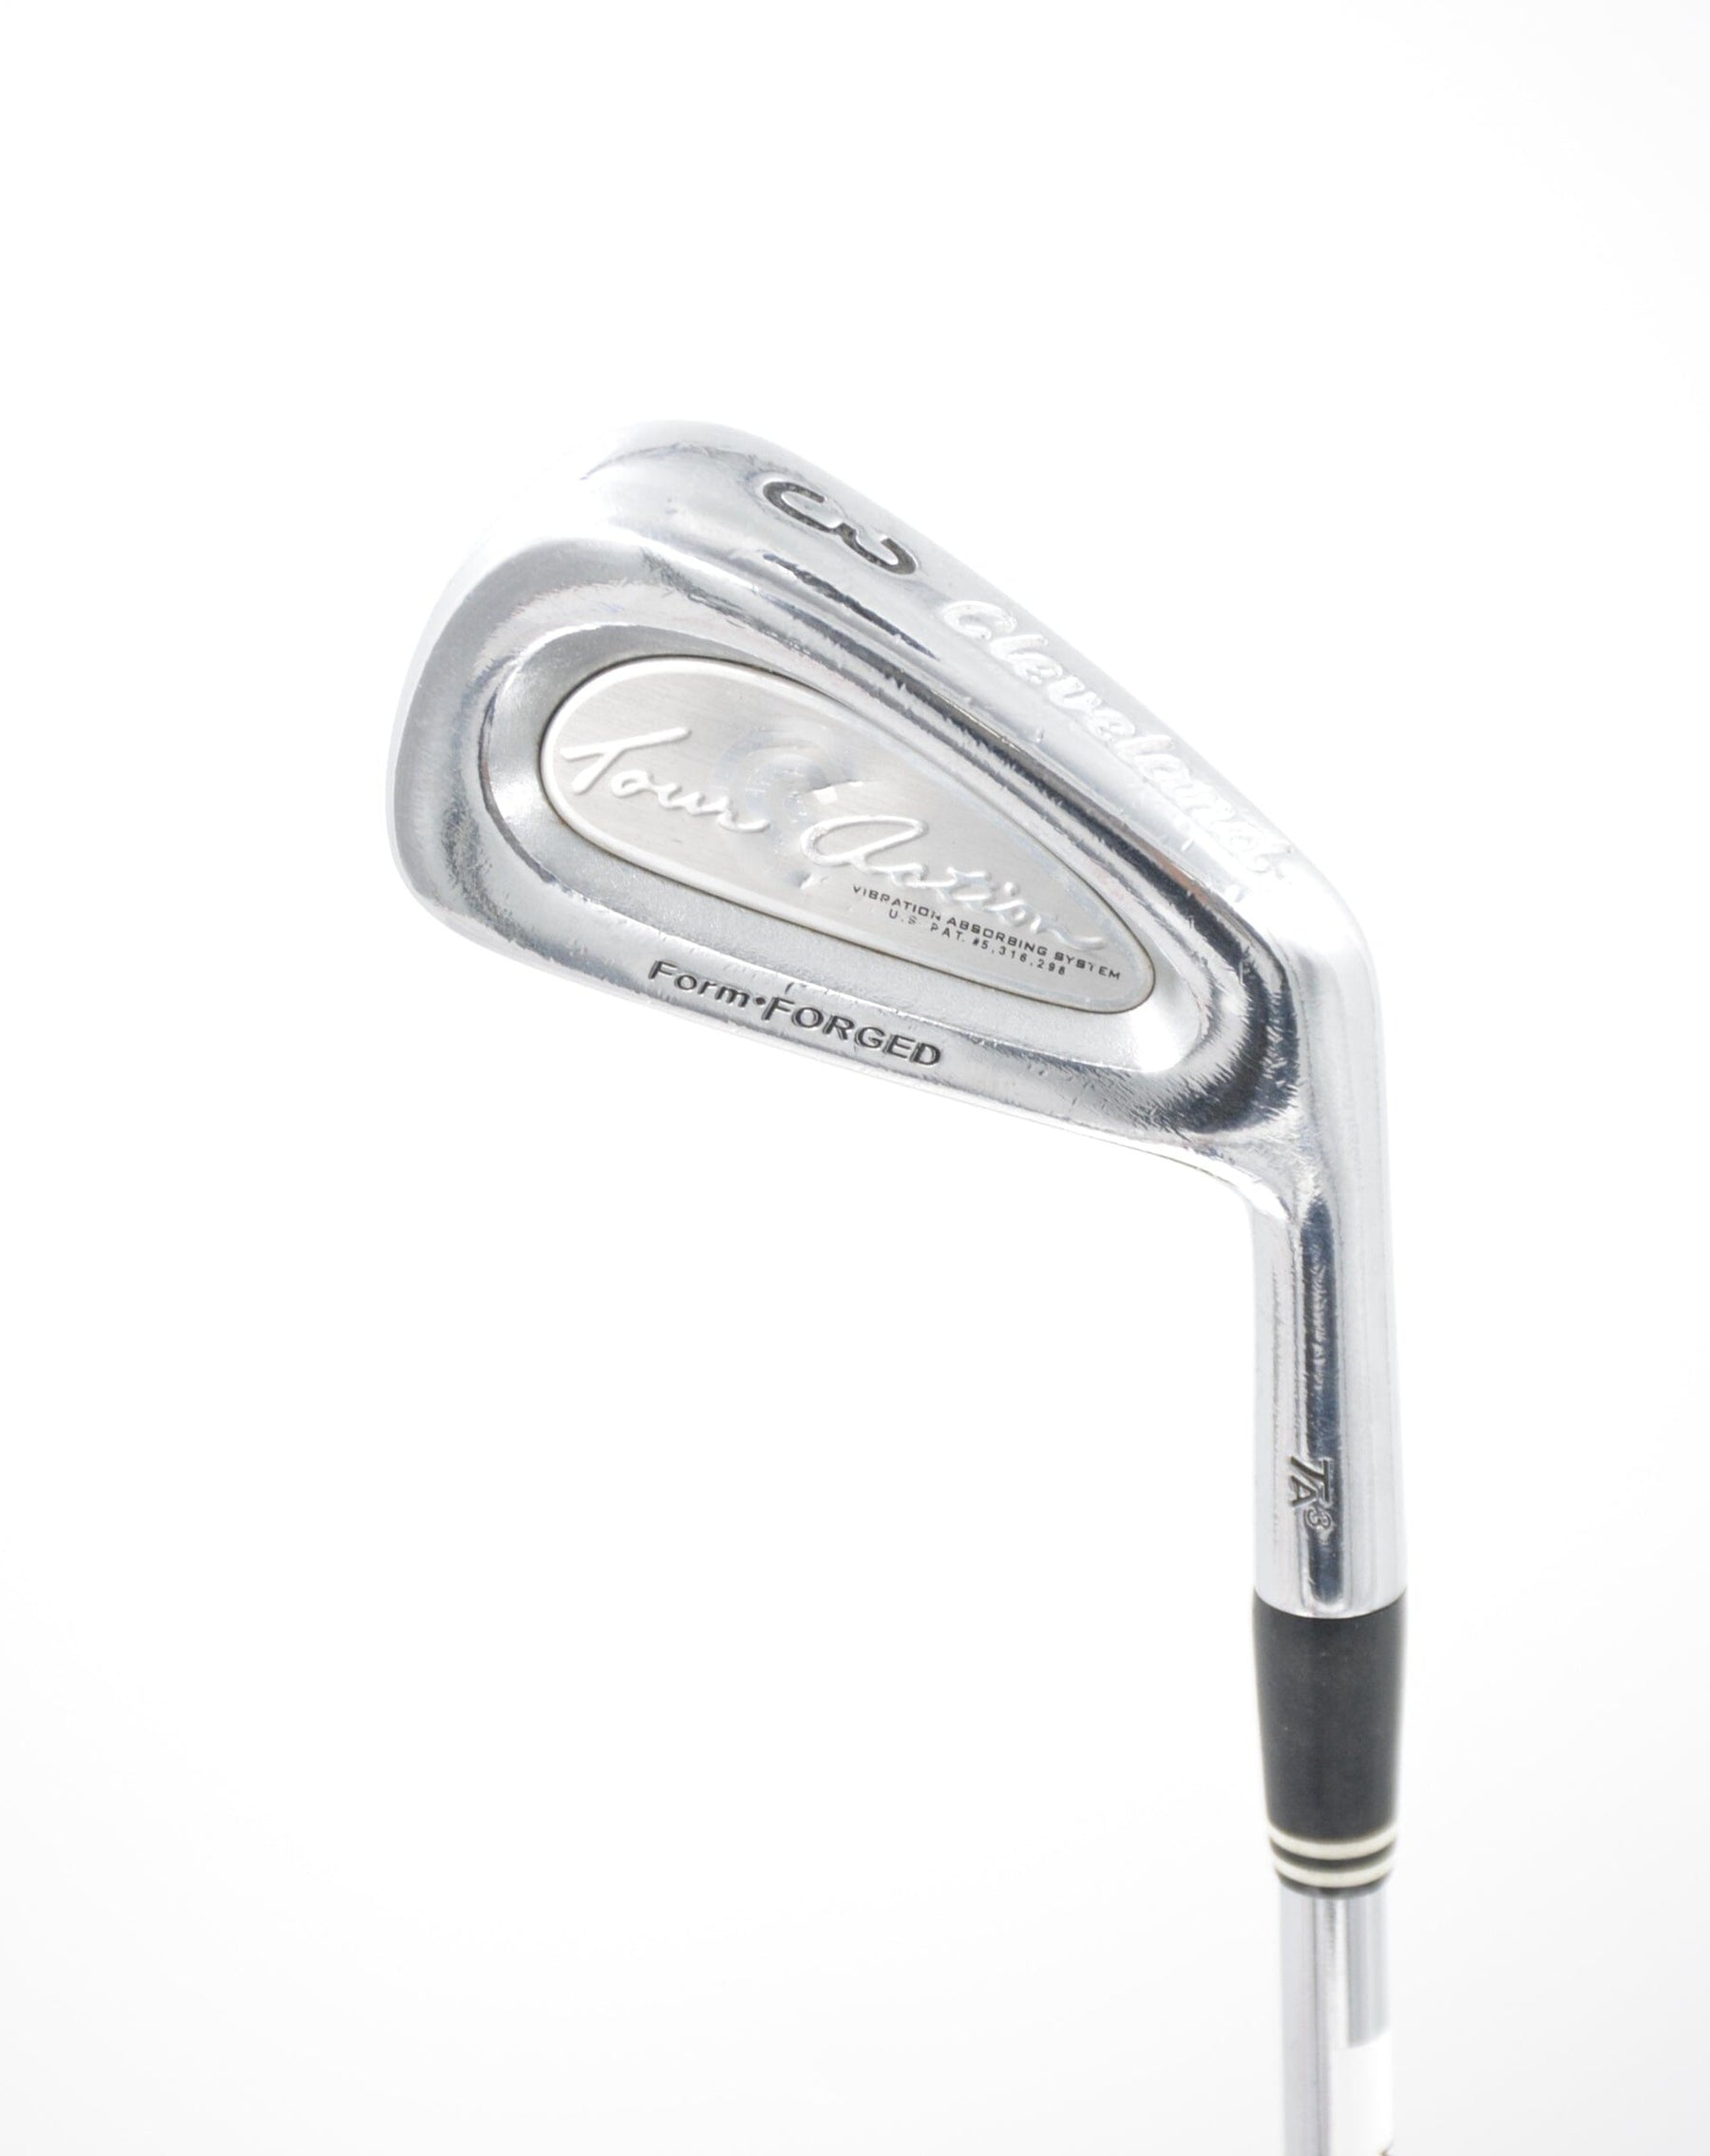 Cleveland Ta3 Form Forged 3 Iron S Flex +1" Golf Clubs GolfRoots 